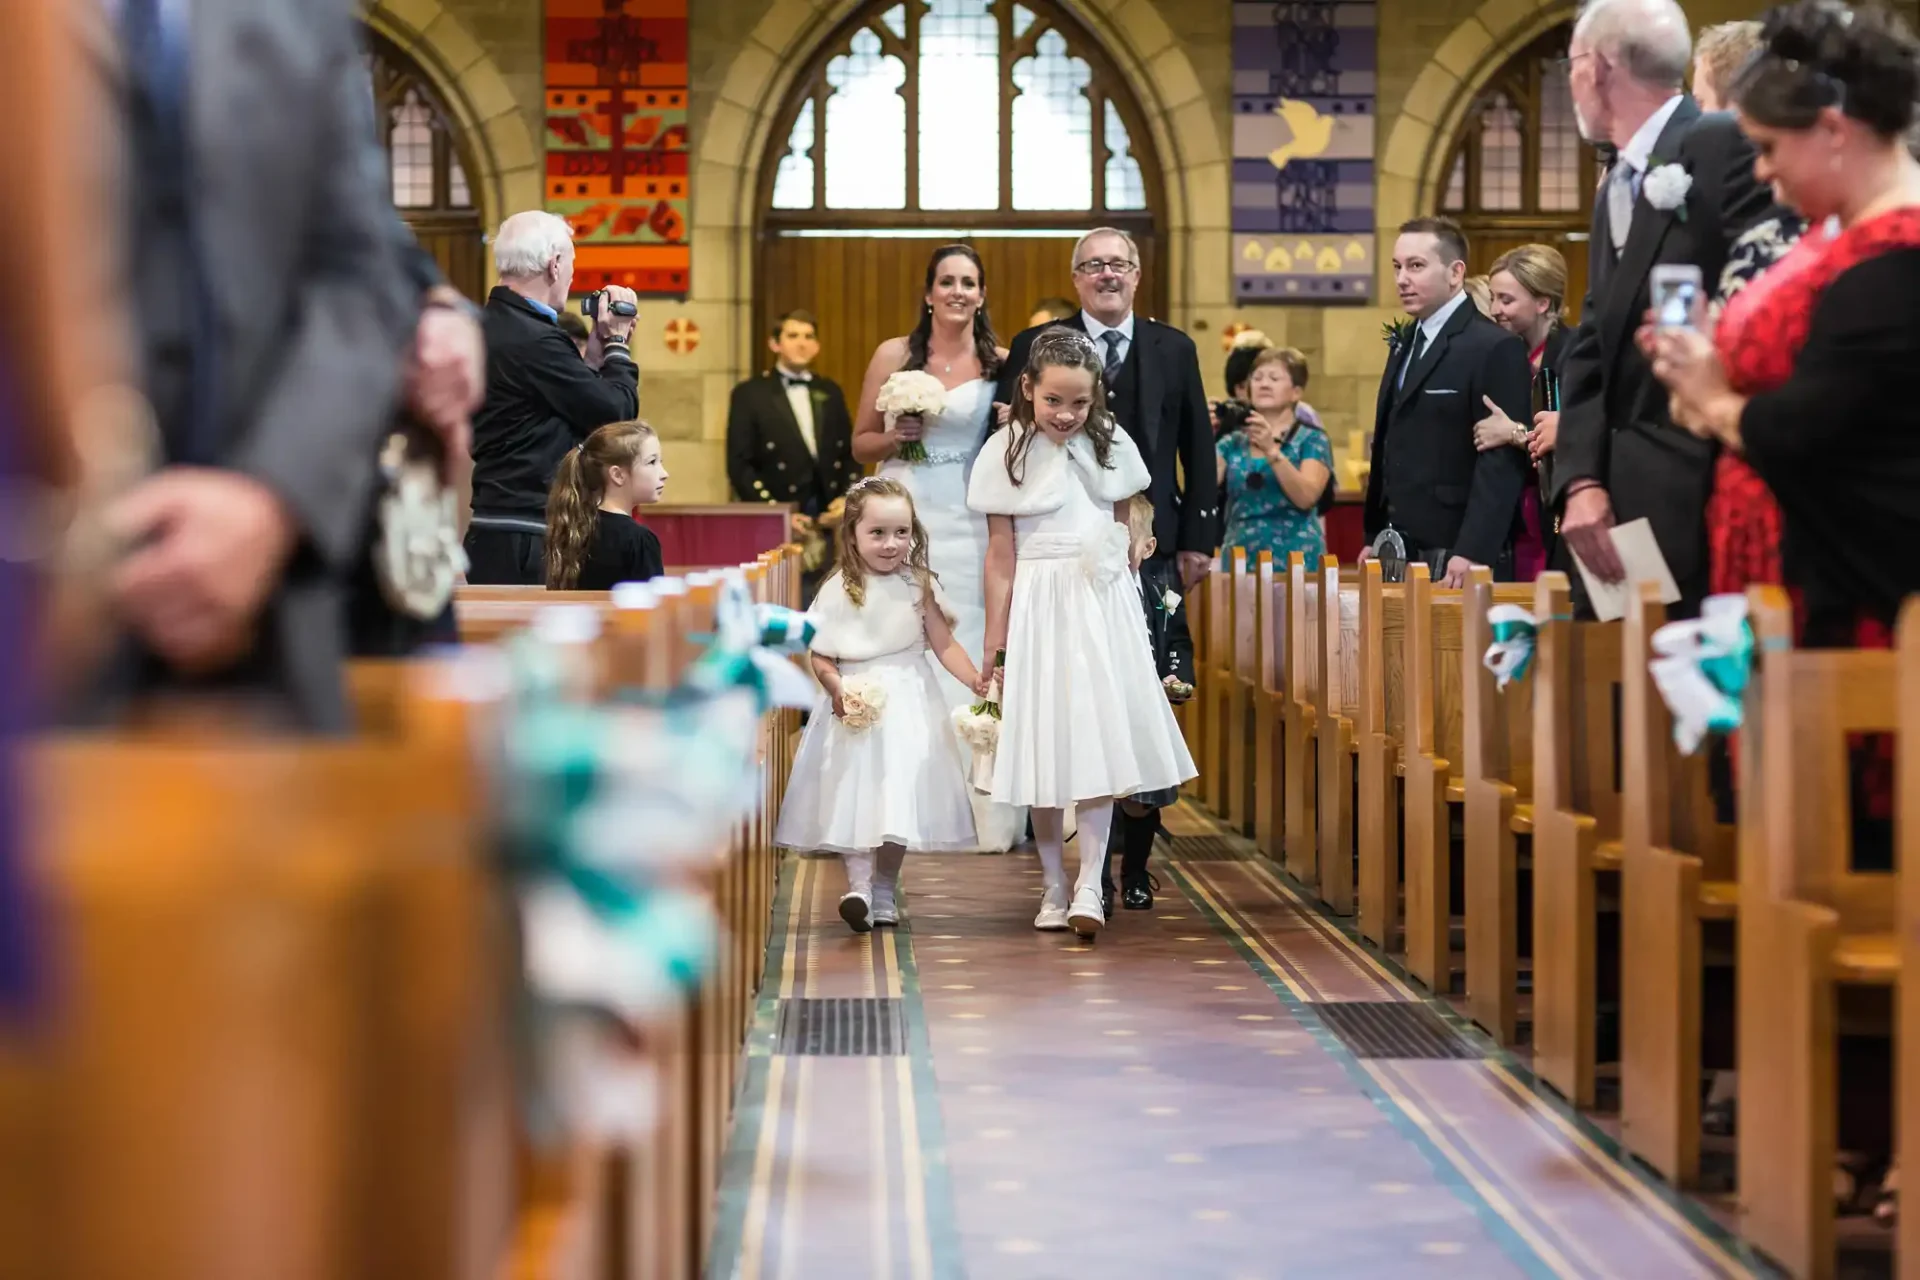 A joyful procession down a church aisle with a man and two girls in white dresses, surrounded by elegantly dressed guests.